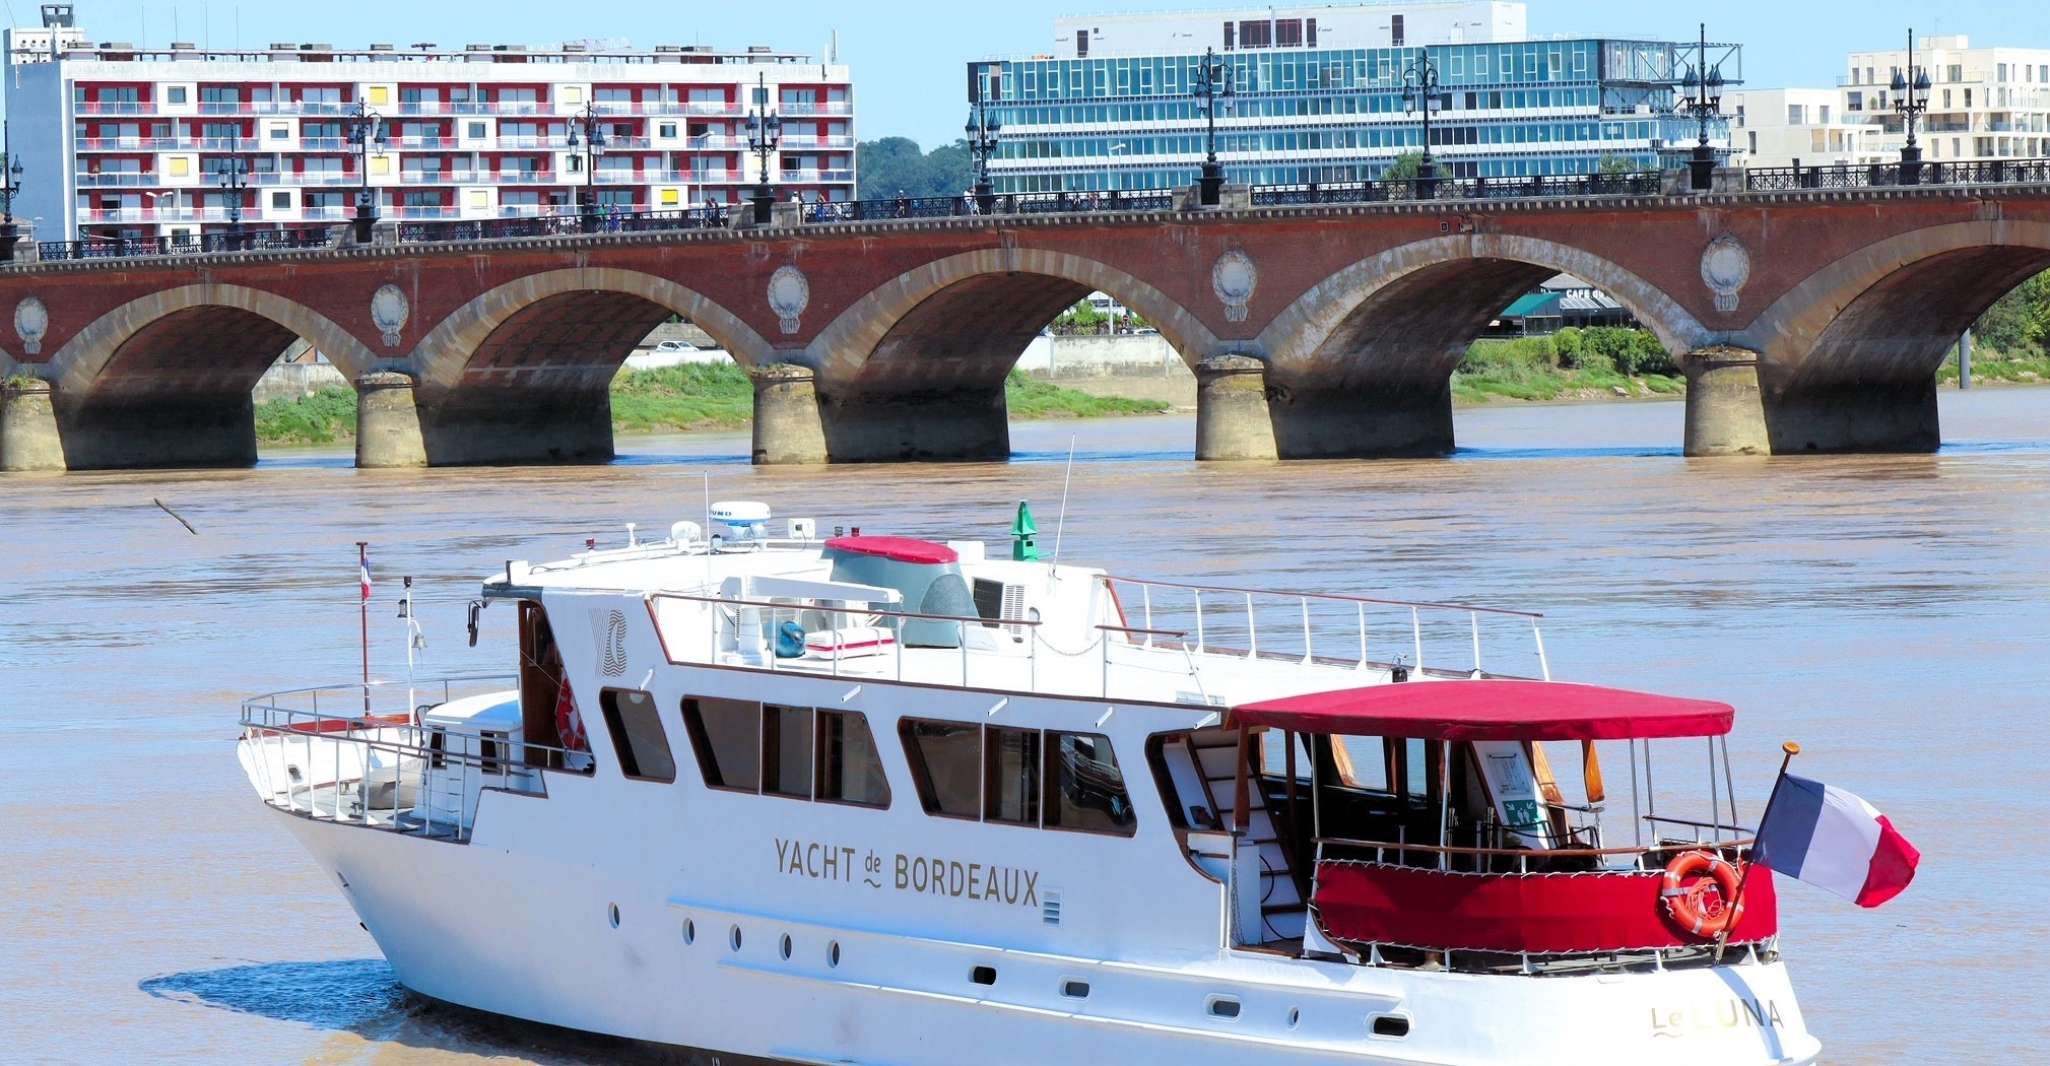 BORDEAUX, Tasty guided cruise with canelé and glass of wine. - Housity